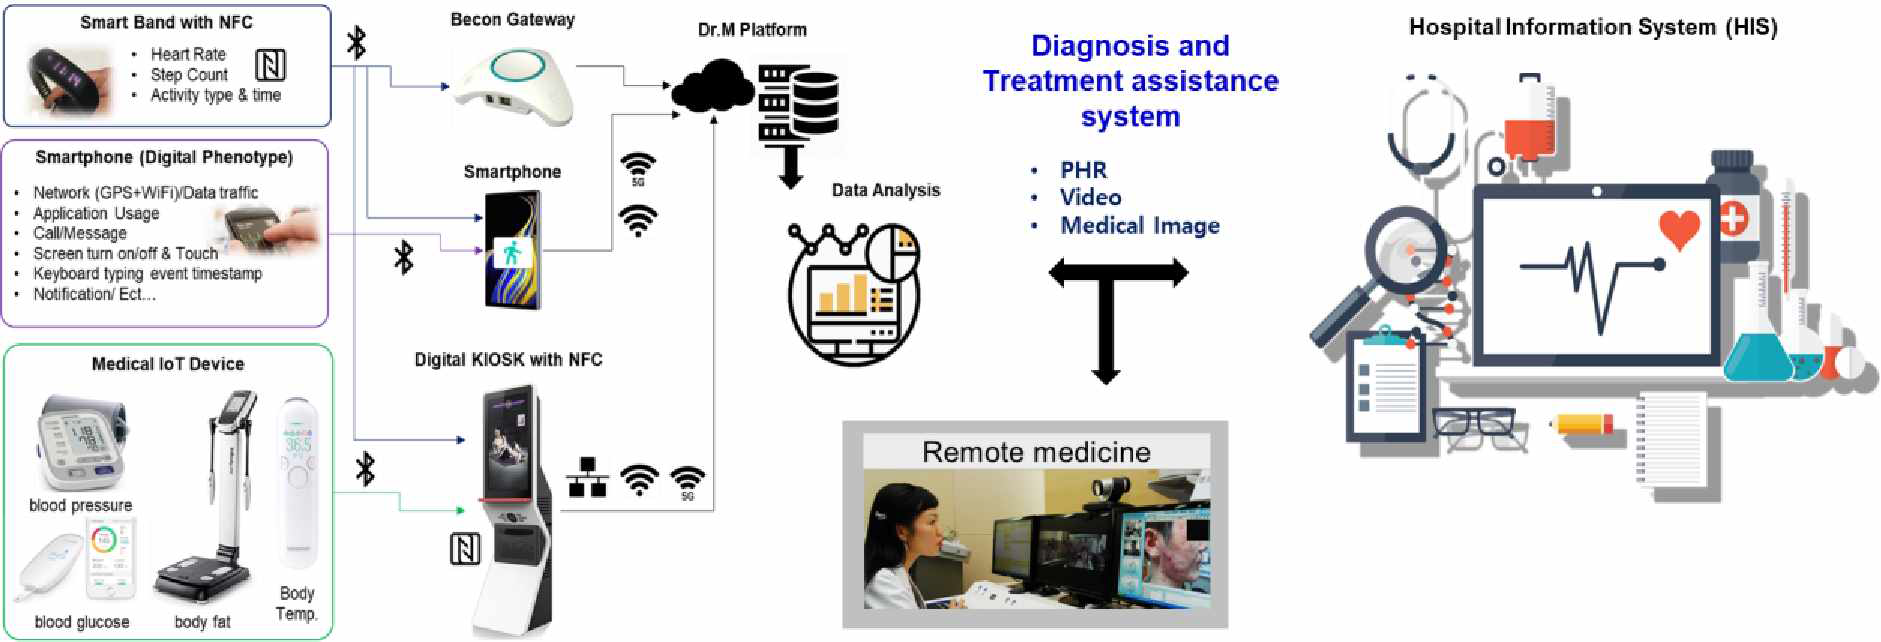 Dr.M platform that enables non-face-to-face treatment and can be linked with the hospital information system